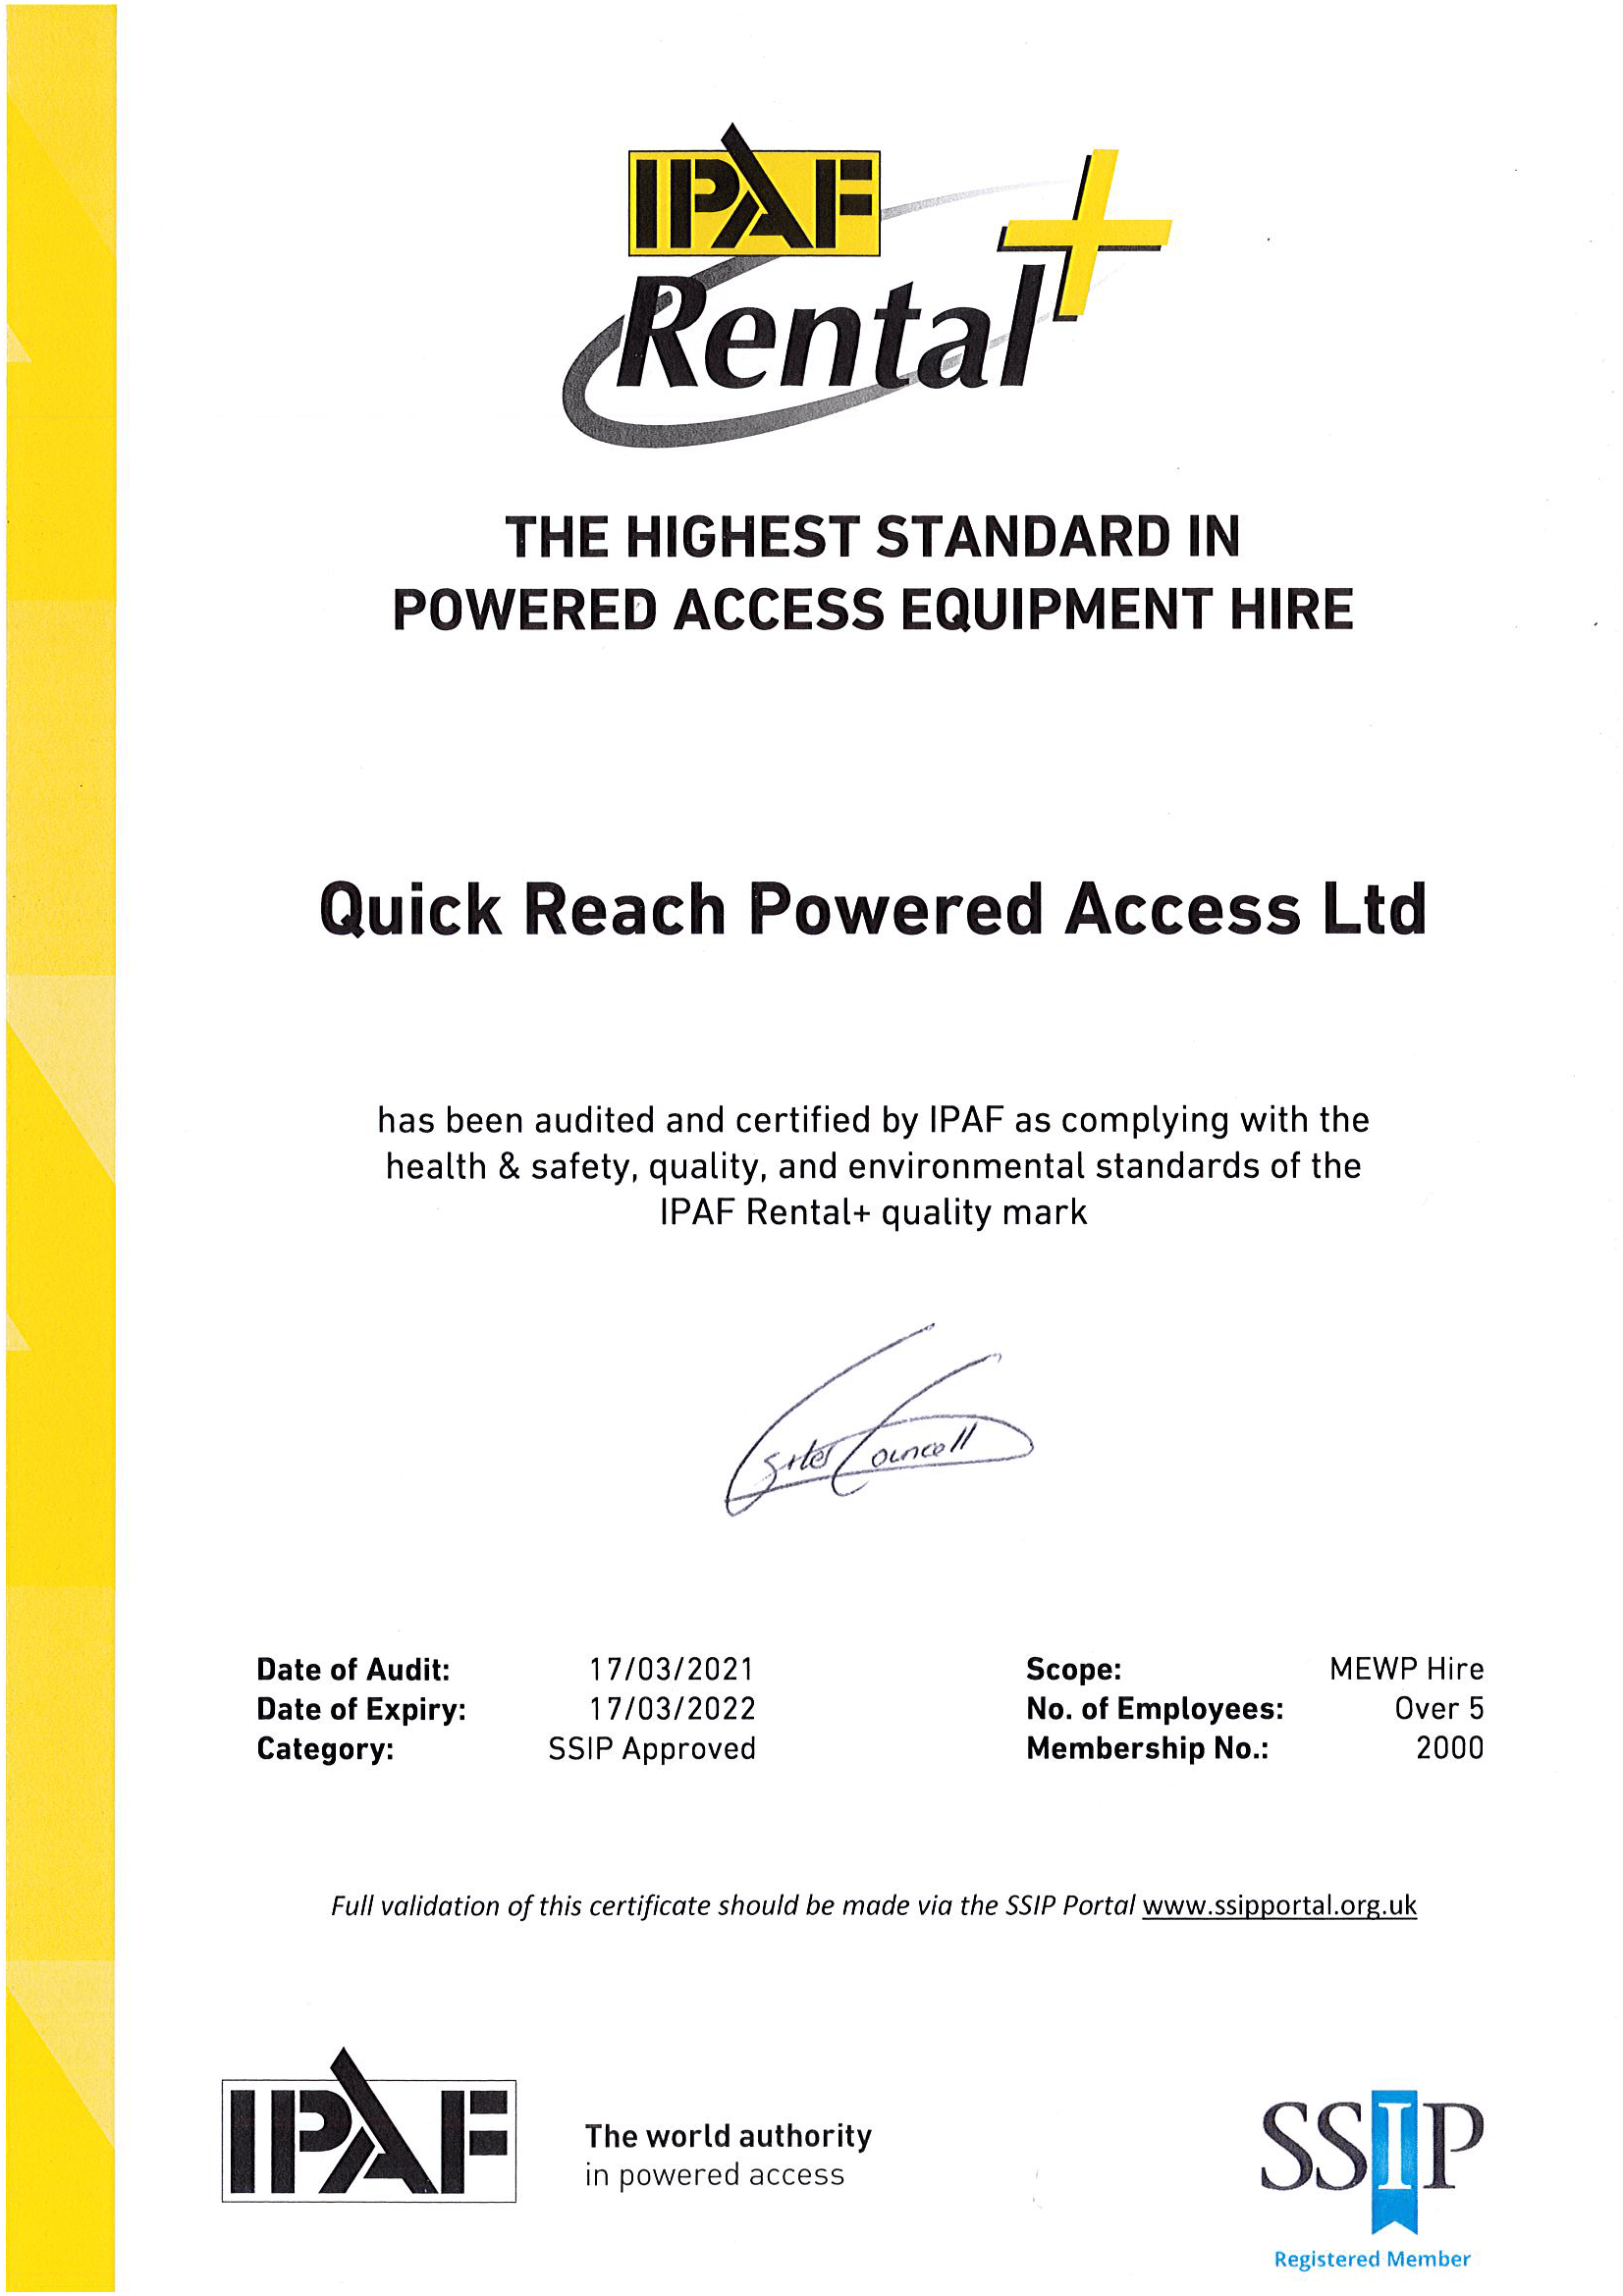 Quick Reach achieves IPAF Rental + Certification